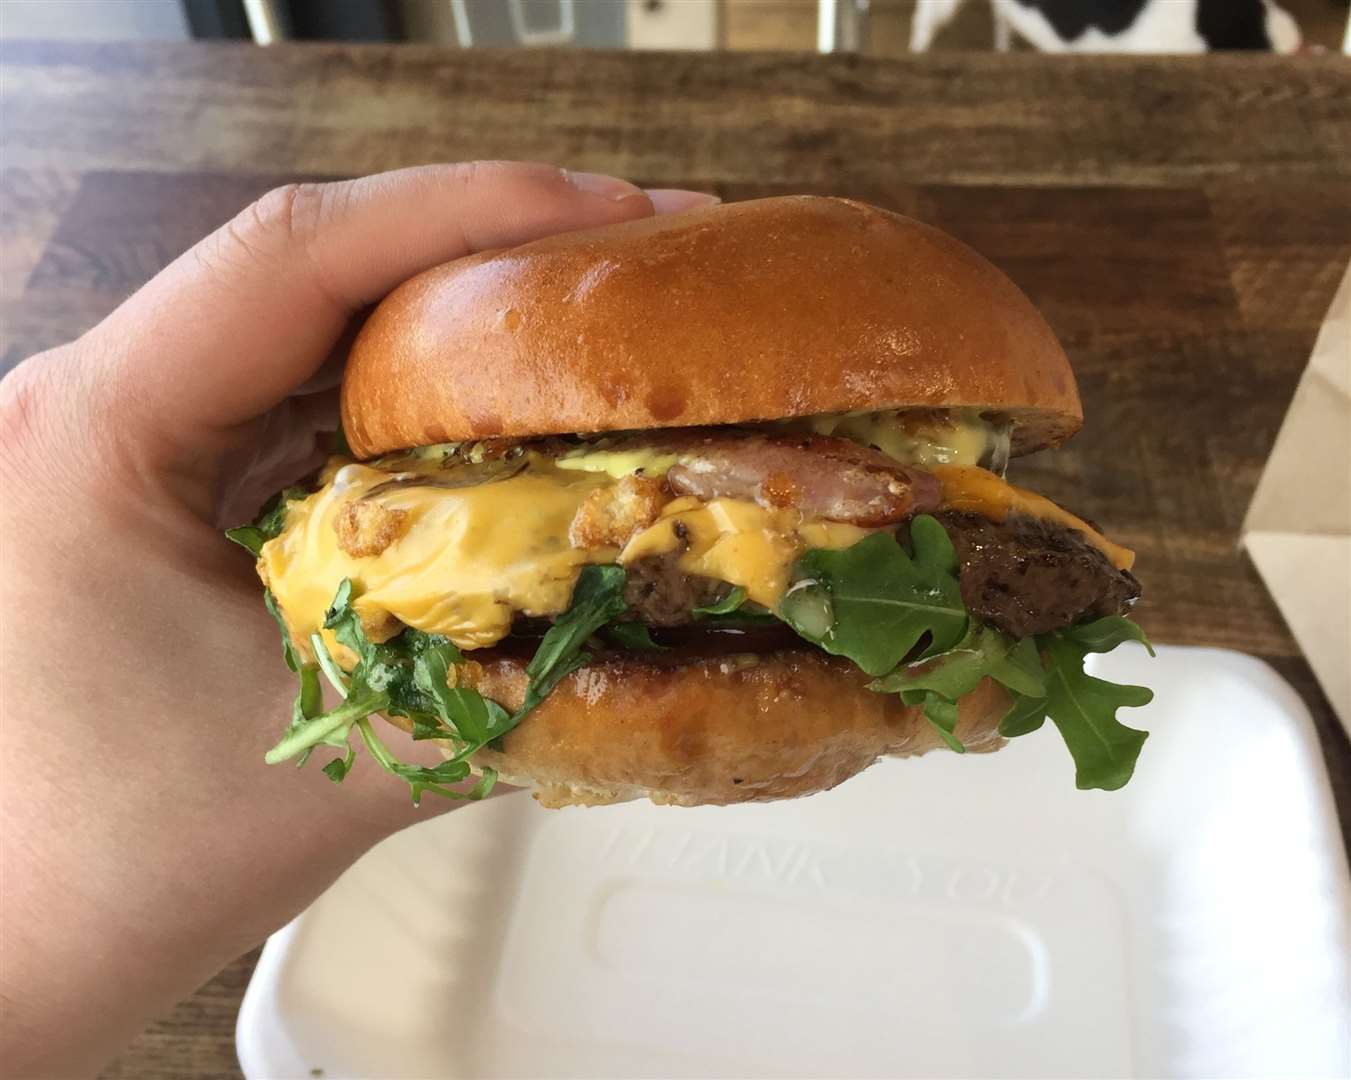 The 'hyper-beef' burger from Rad Burger